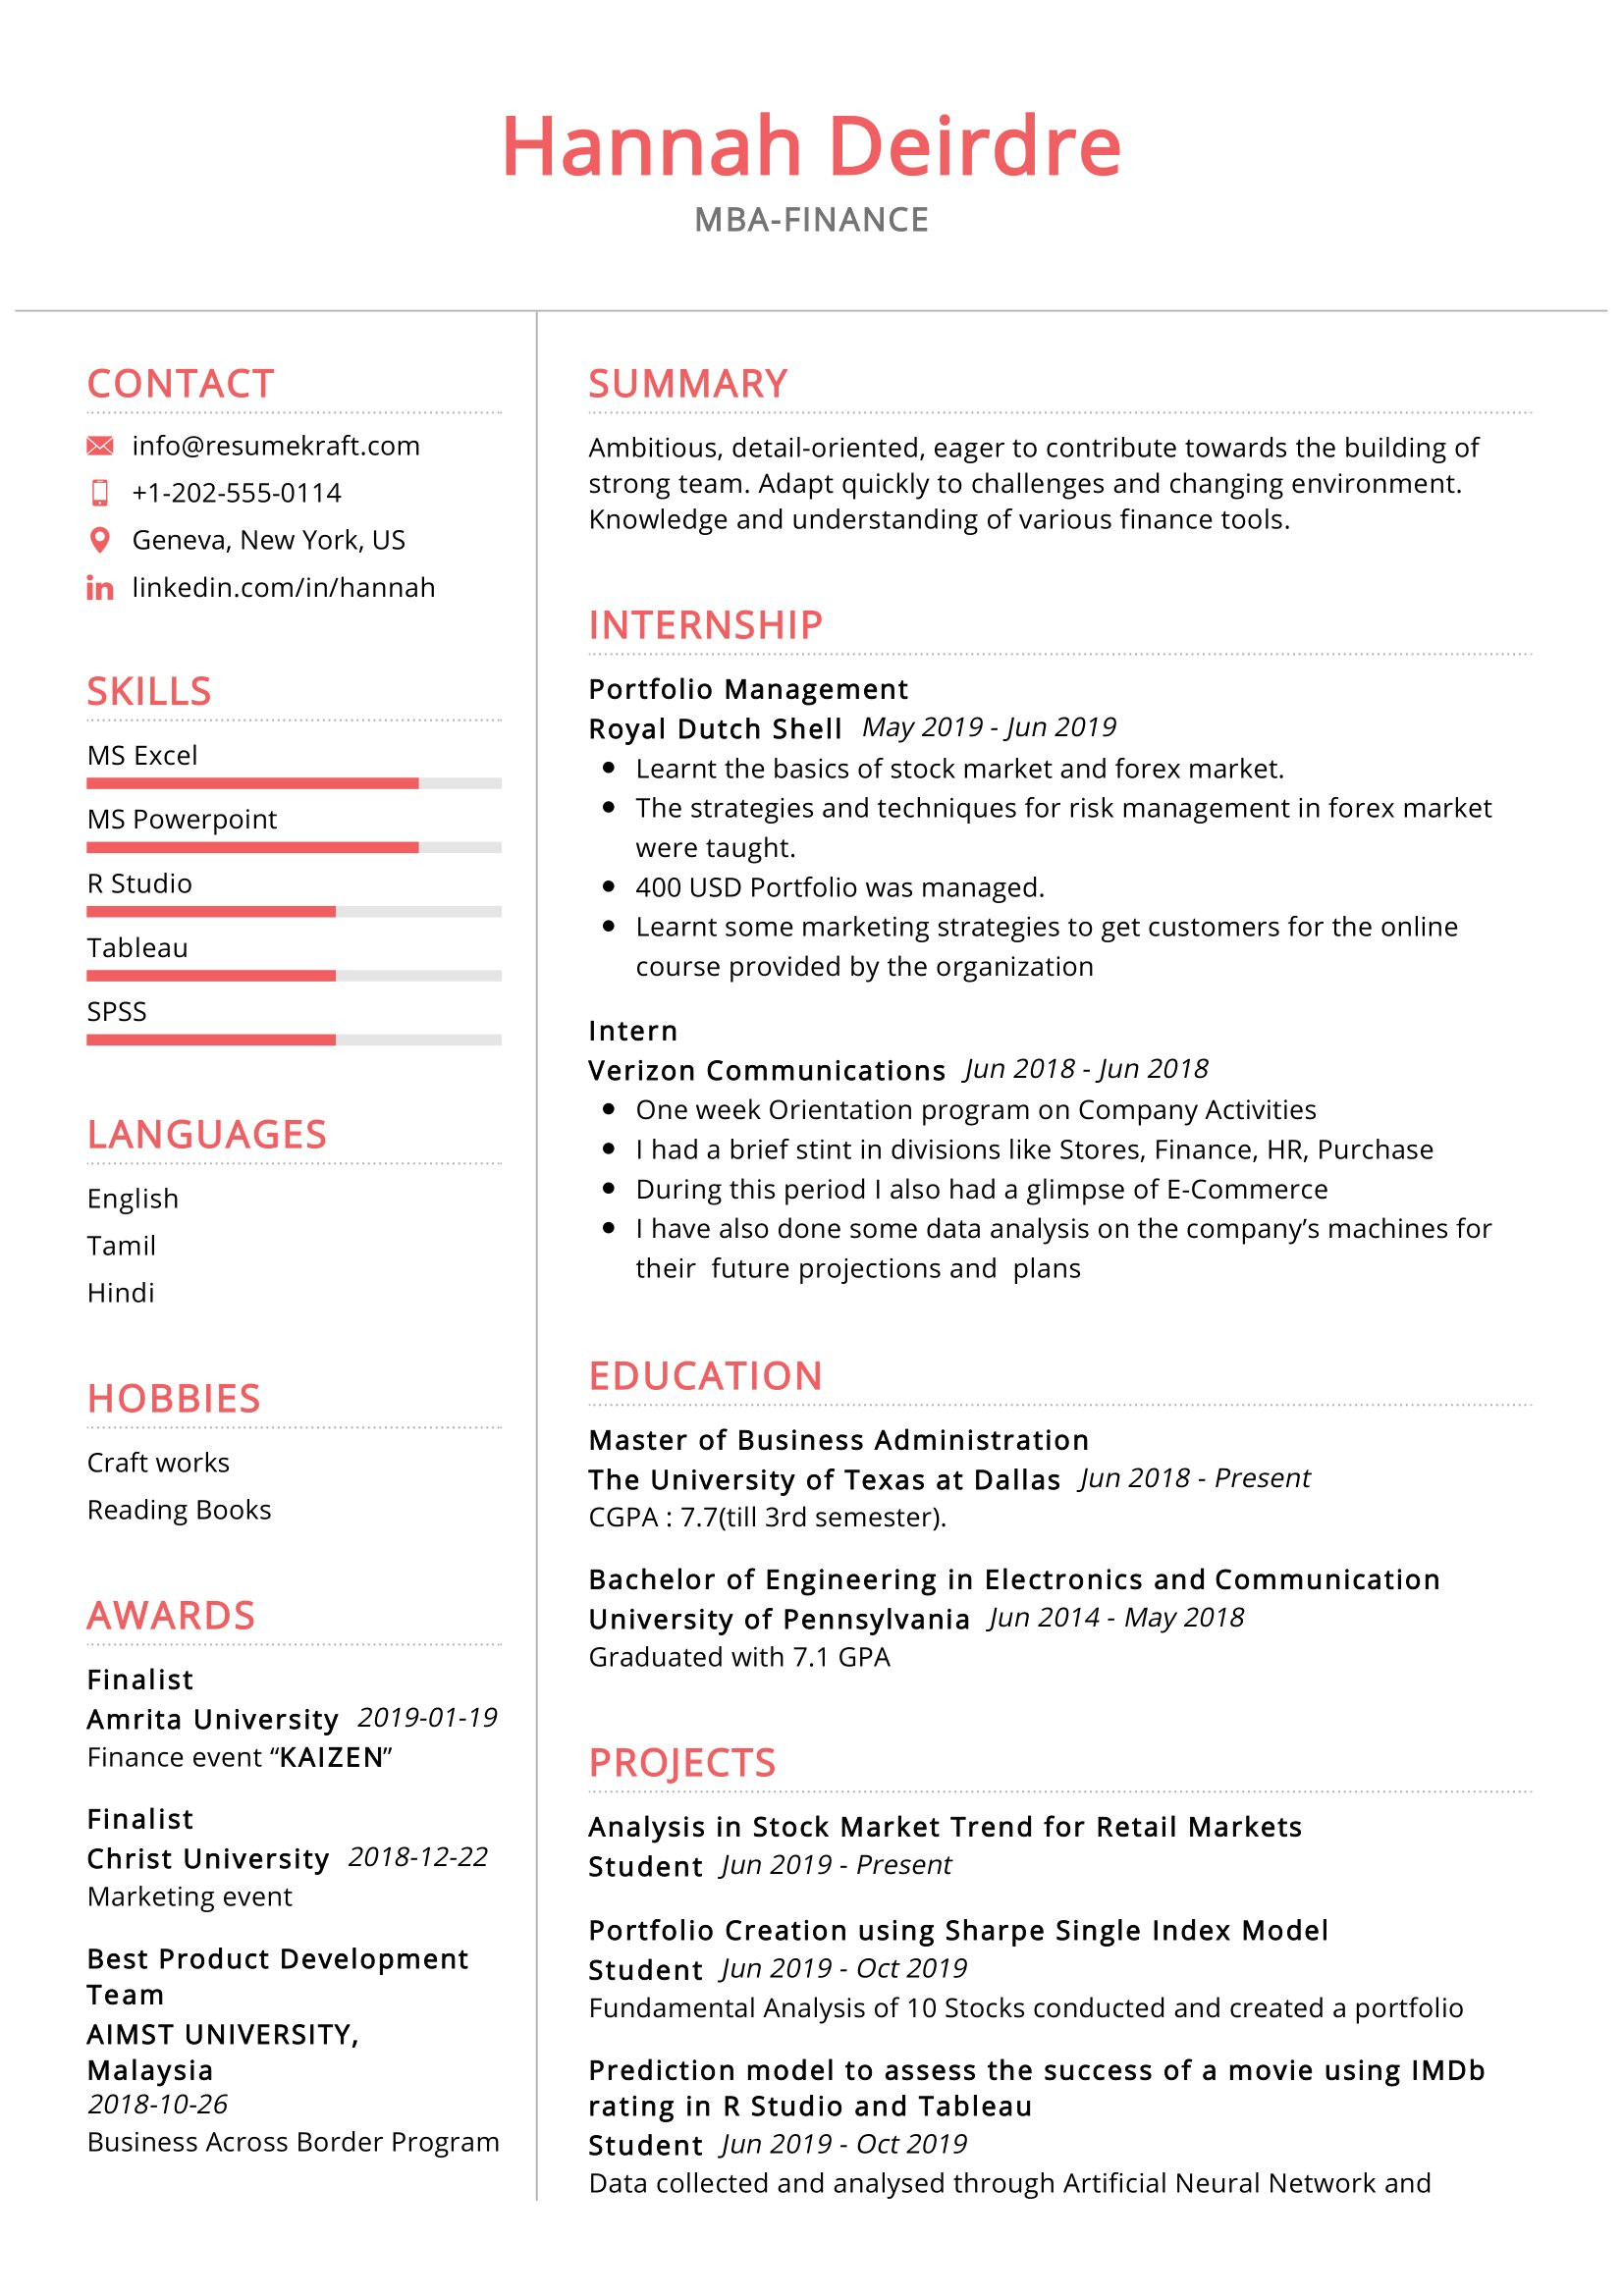 Sample Resume for Freshers Mba Finance and Marketing Mba Finance Resume Sample 2021 Writing Tips – Resumekraft